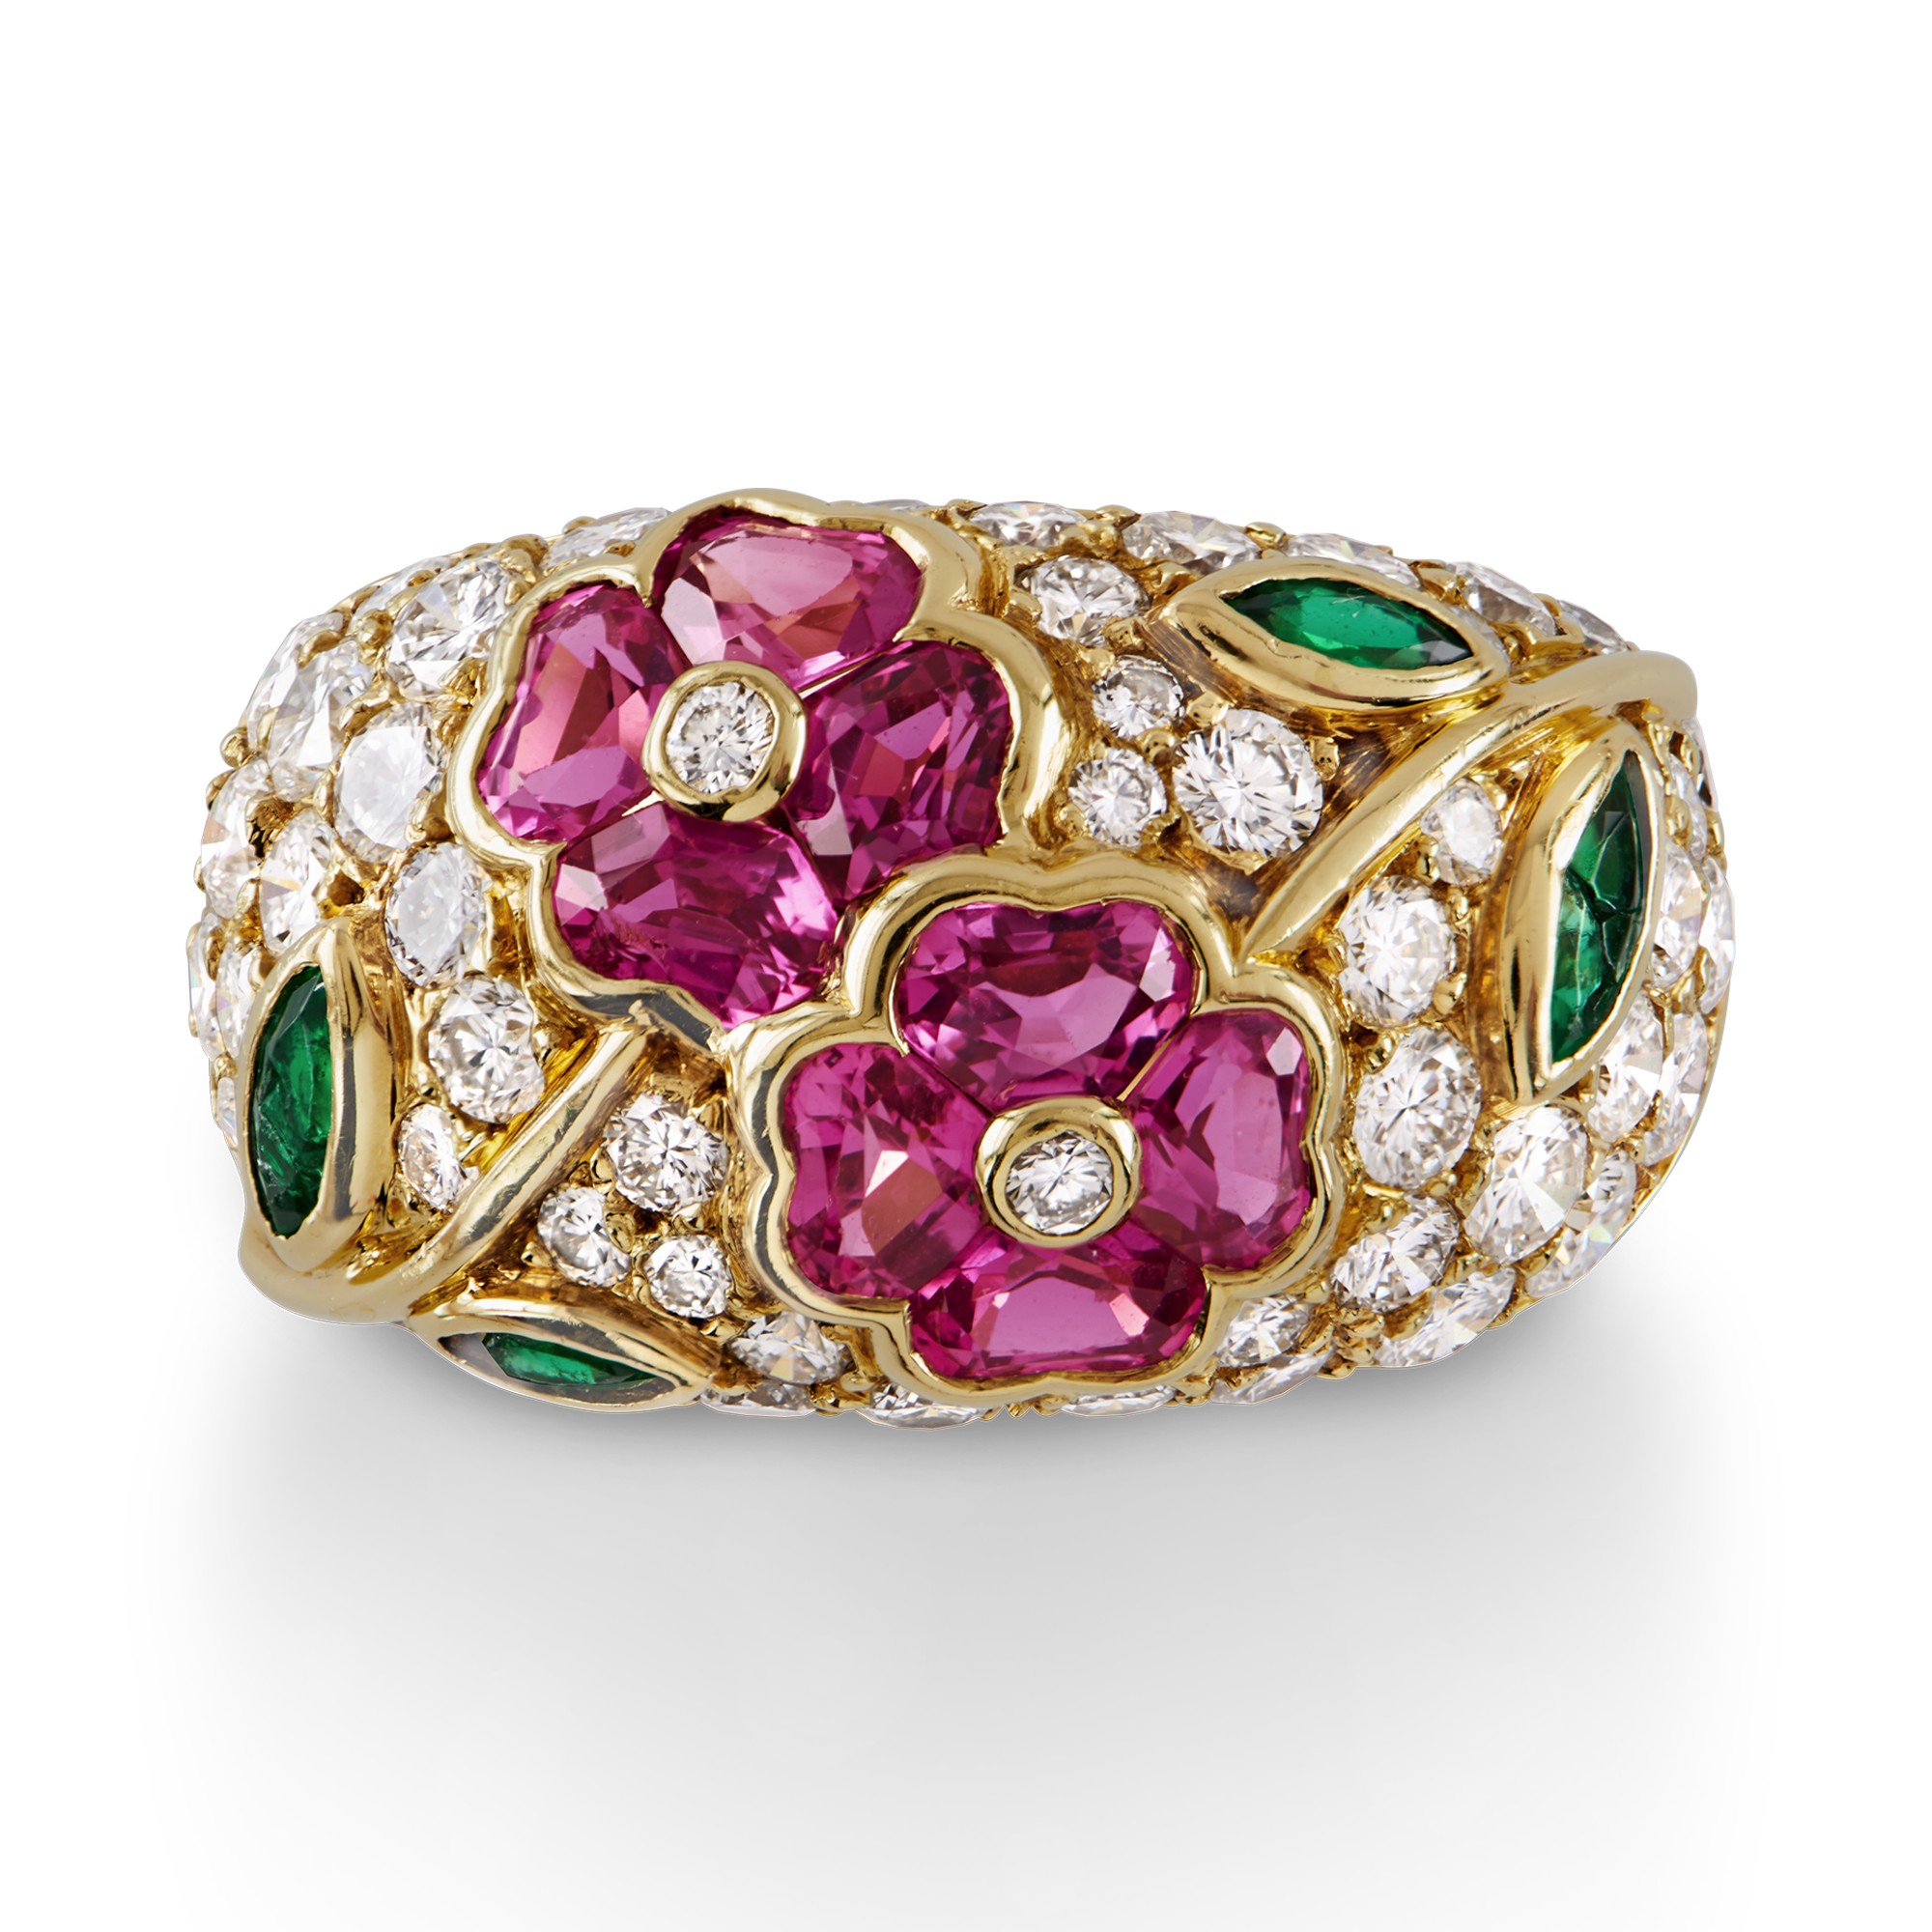 Contemporary Van Cleef & Arpels Floral Ring Cocktail Ring, with Diamond, Pink Sapphire & Emerald_2